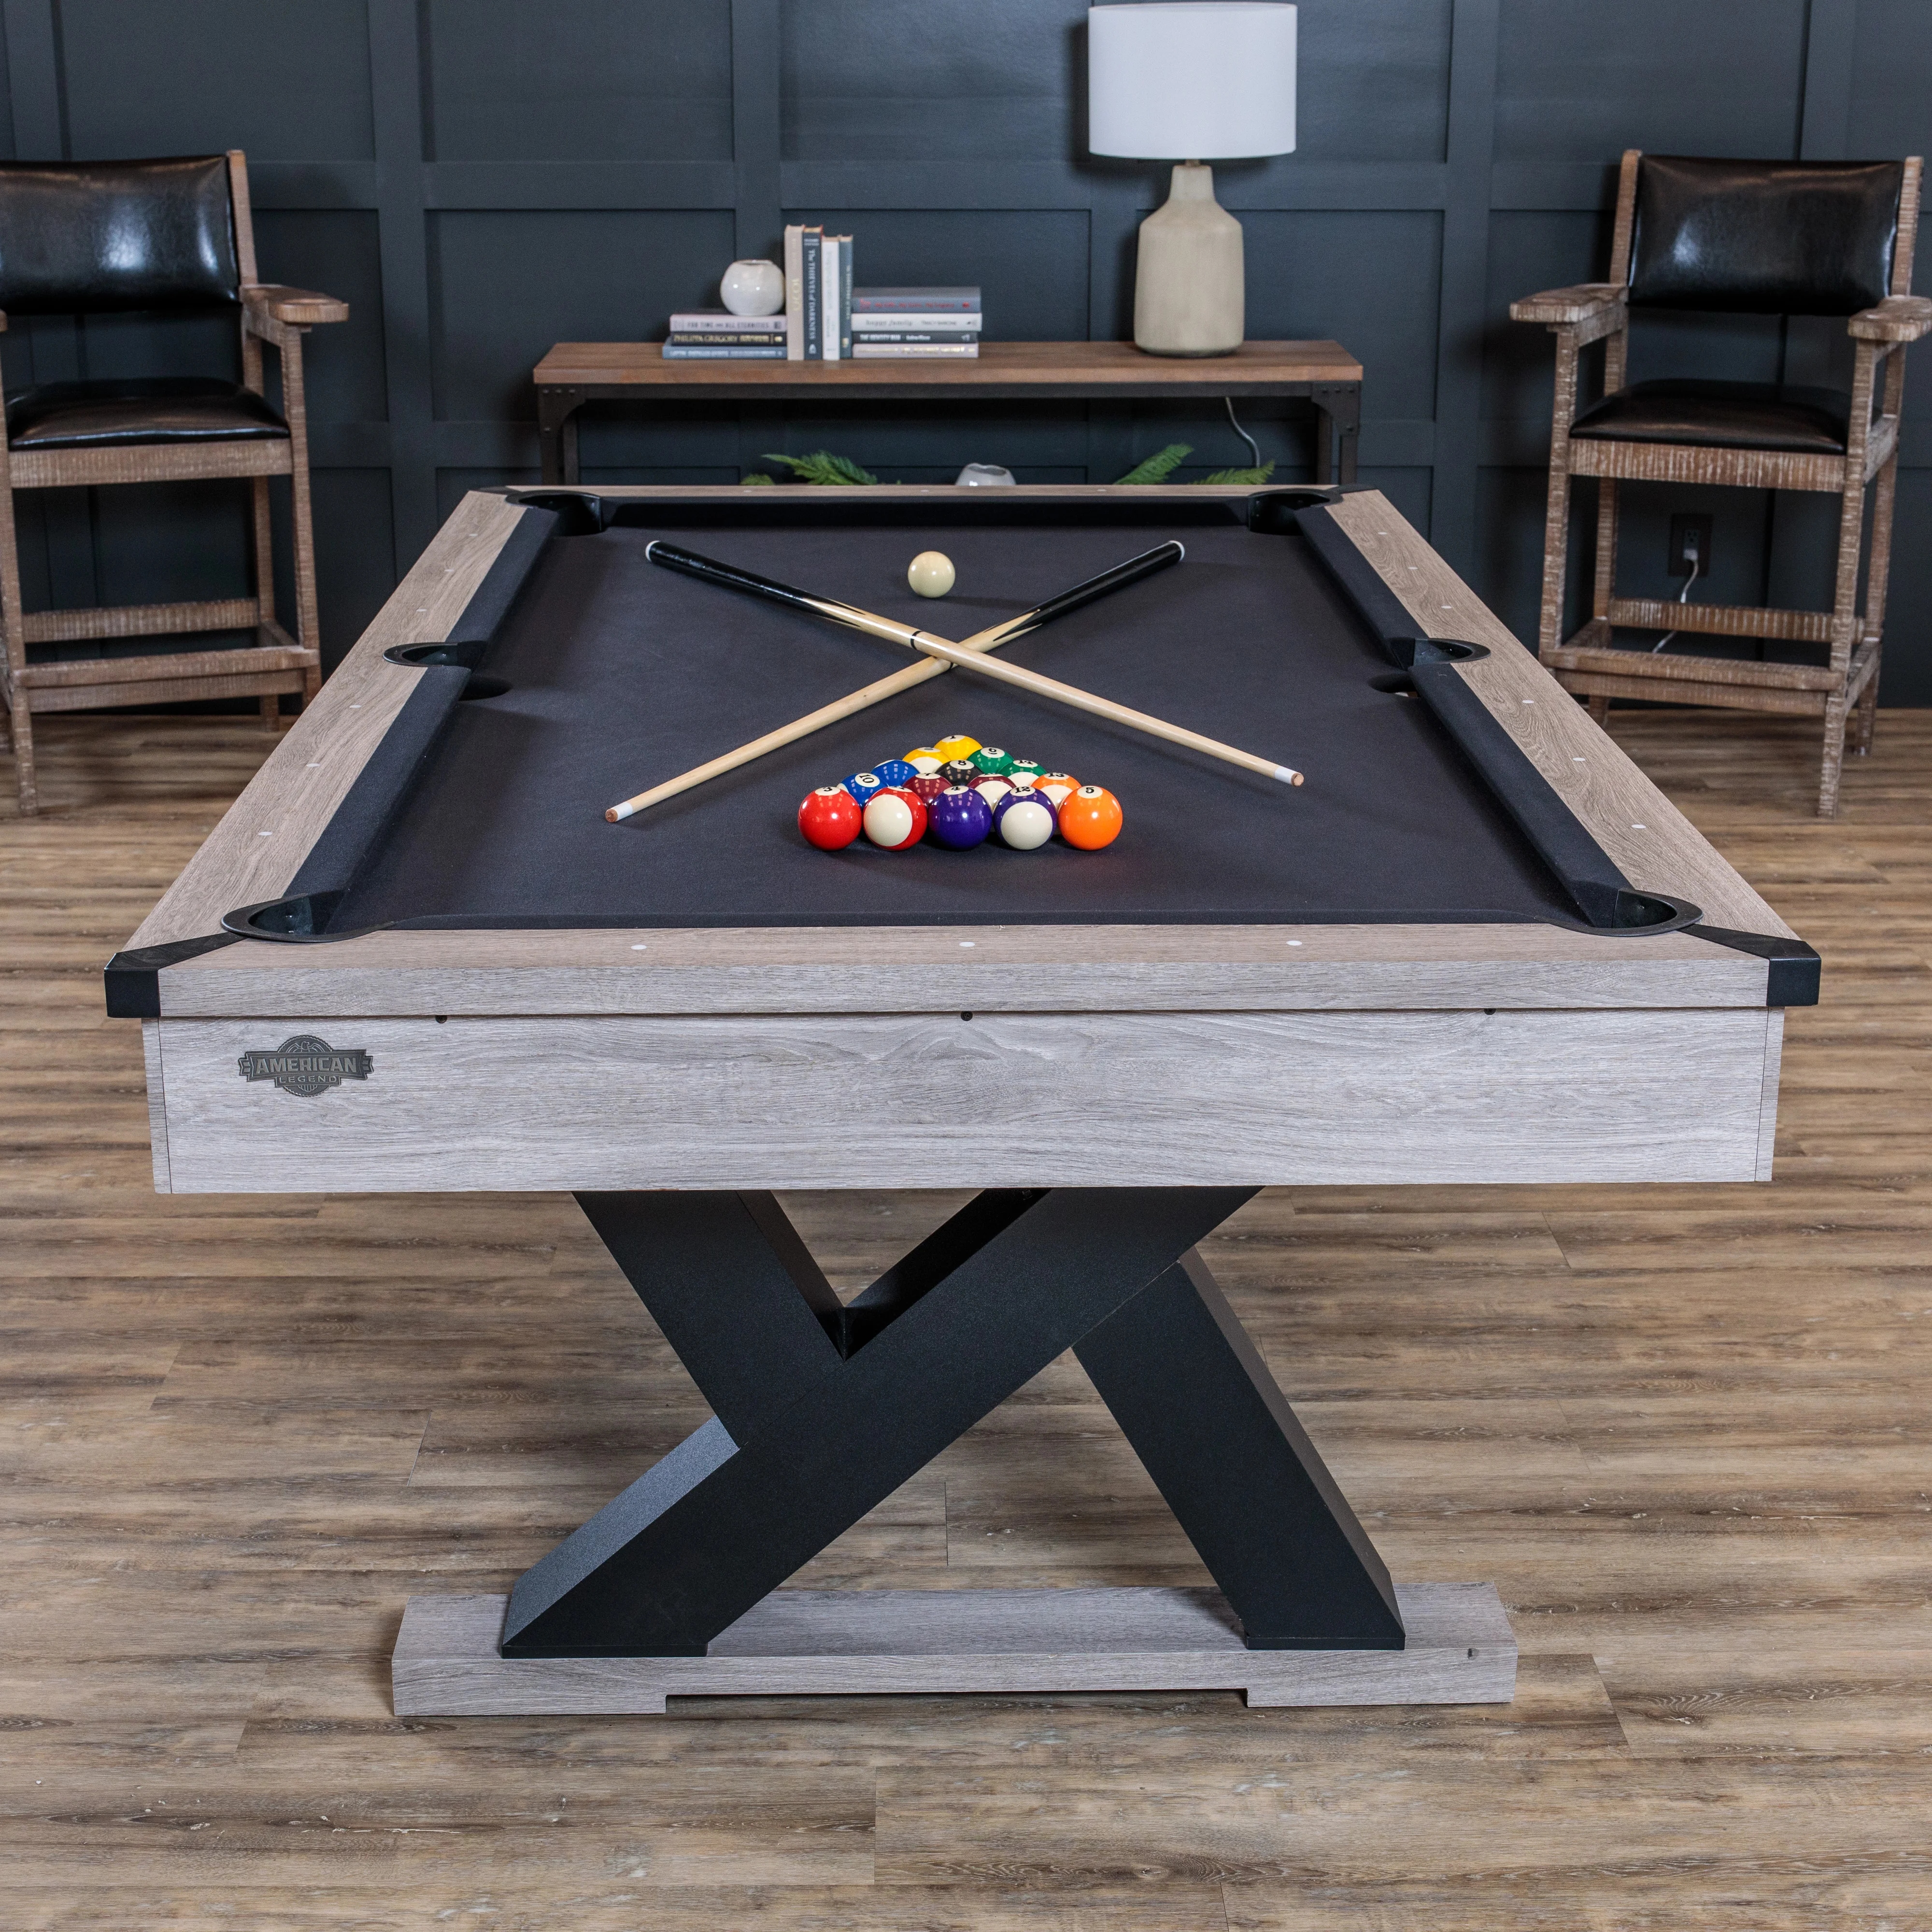 American Legend Pool Table Reviews - Where Quality Meets Performance